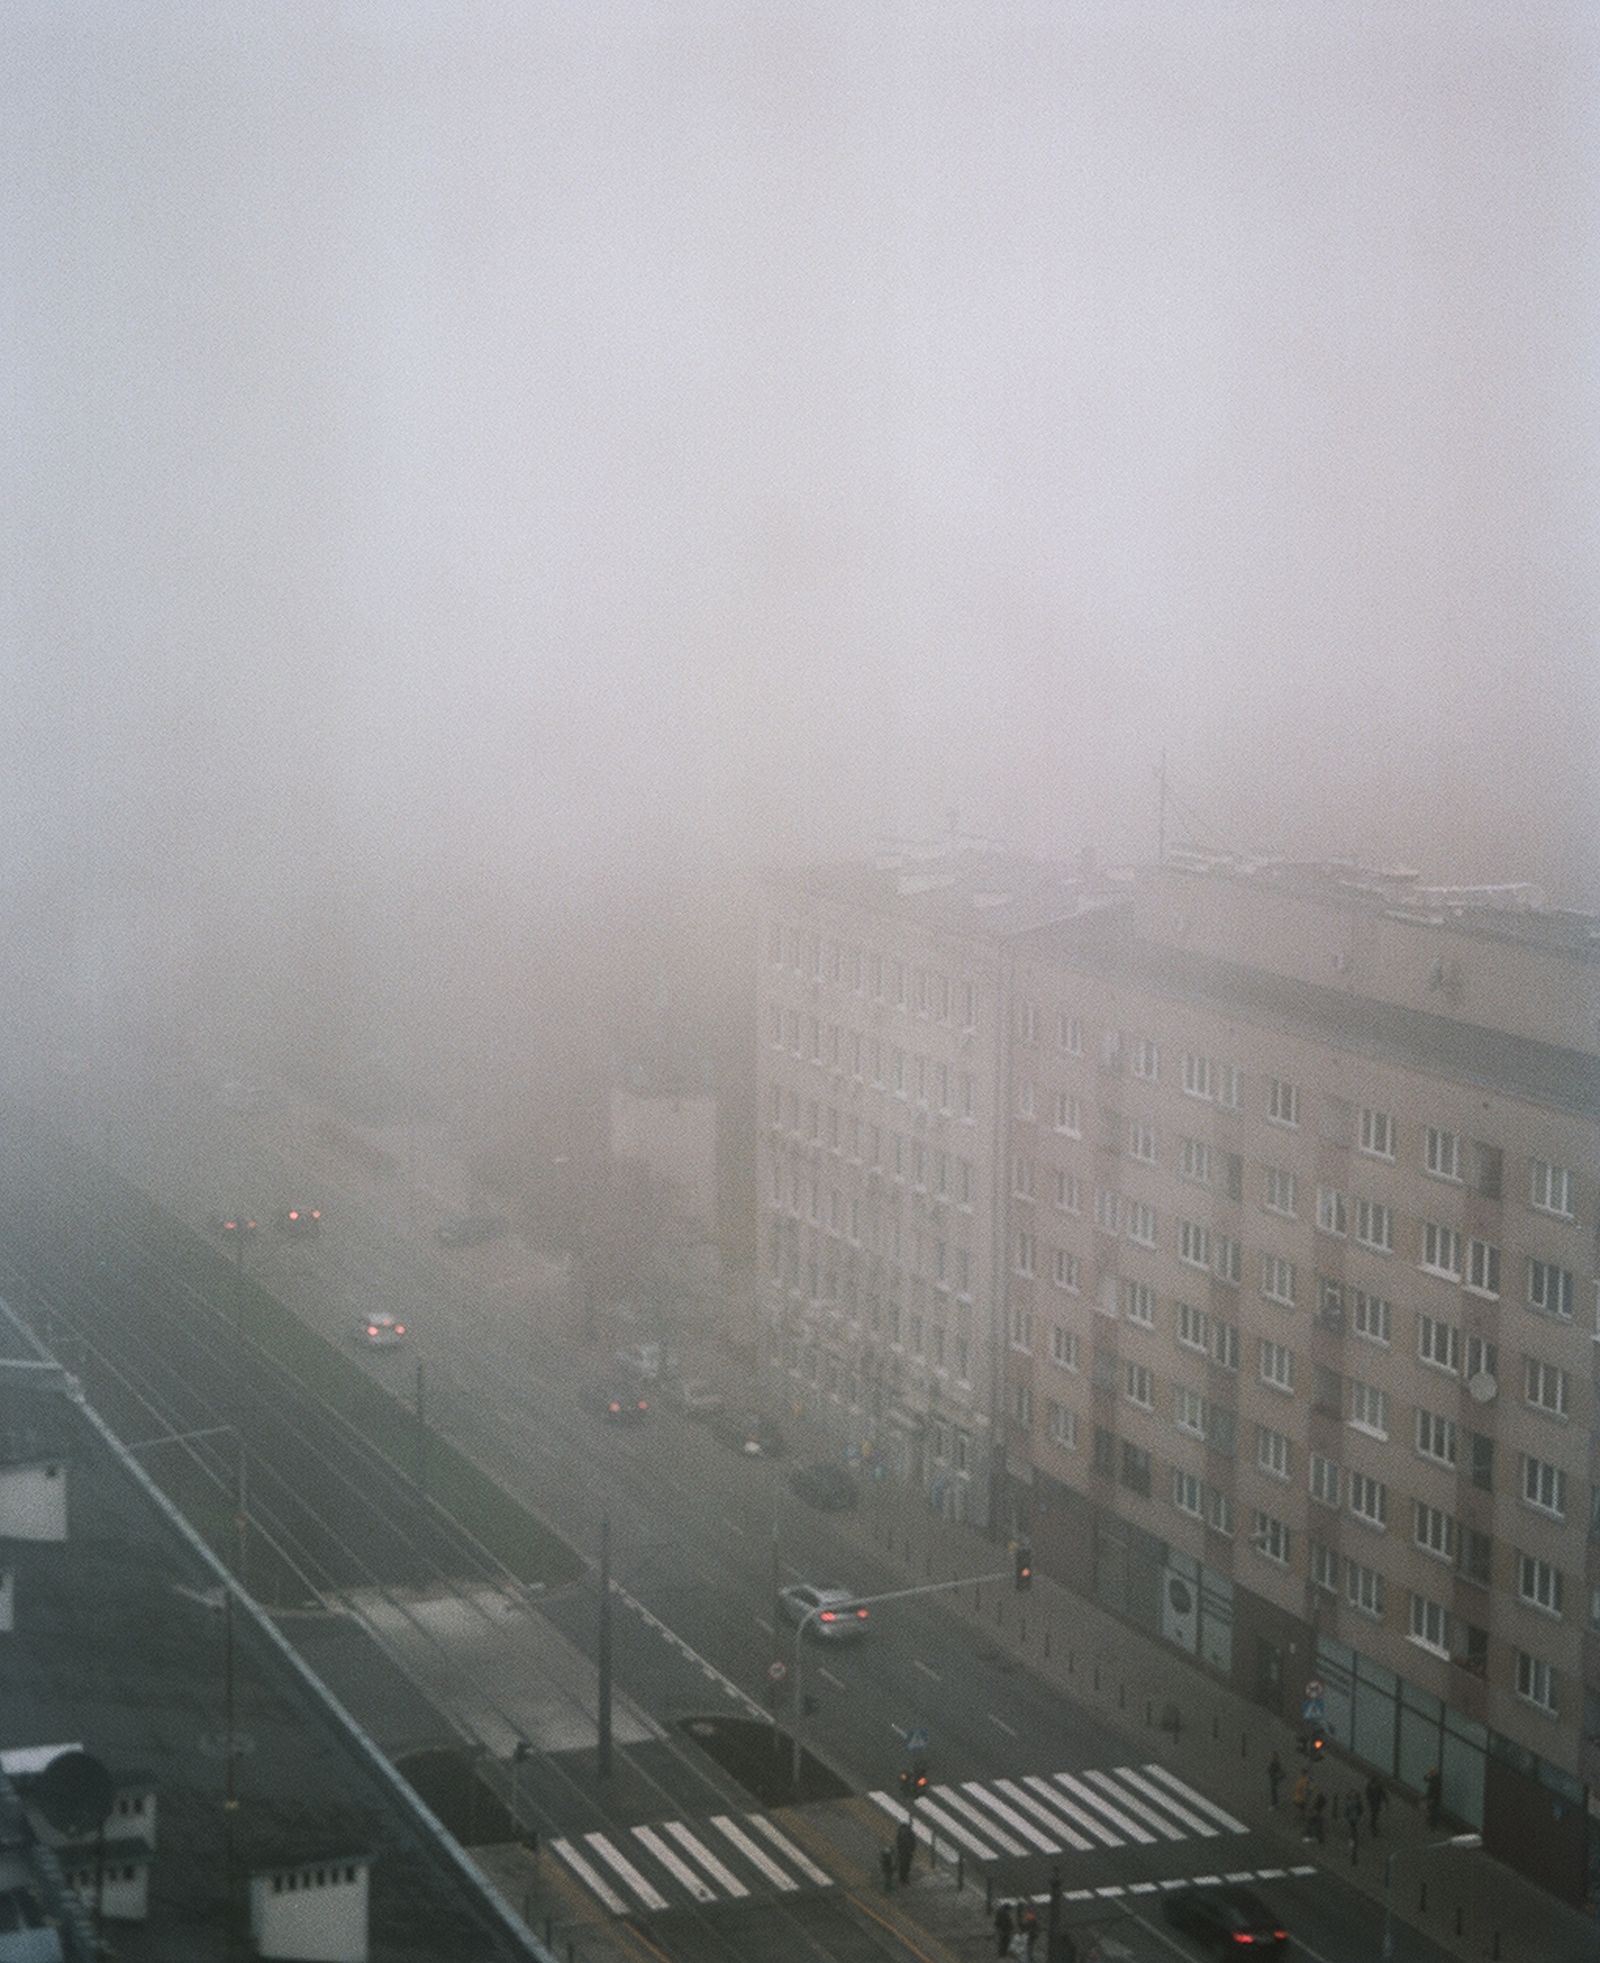 © Jakub Stanek - Image from the In Anticipation of the Sun photography project